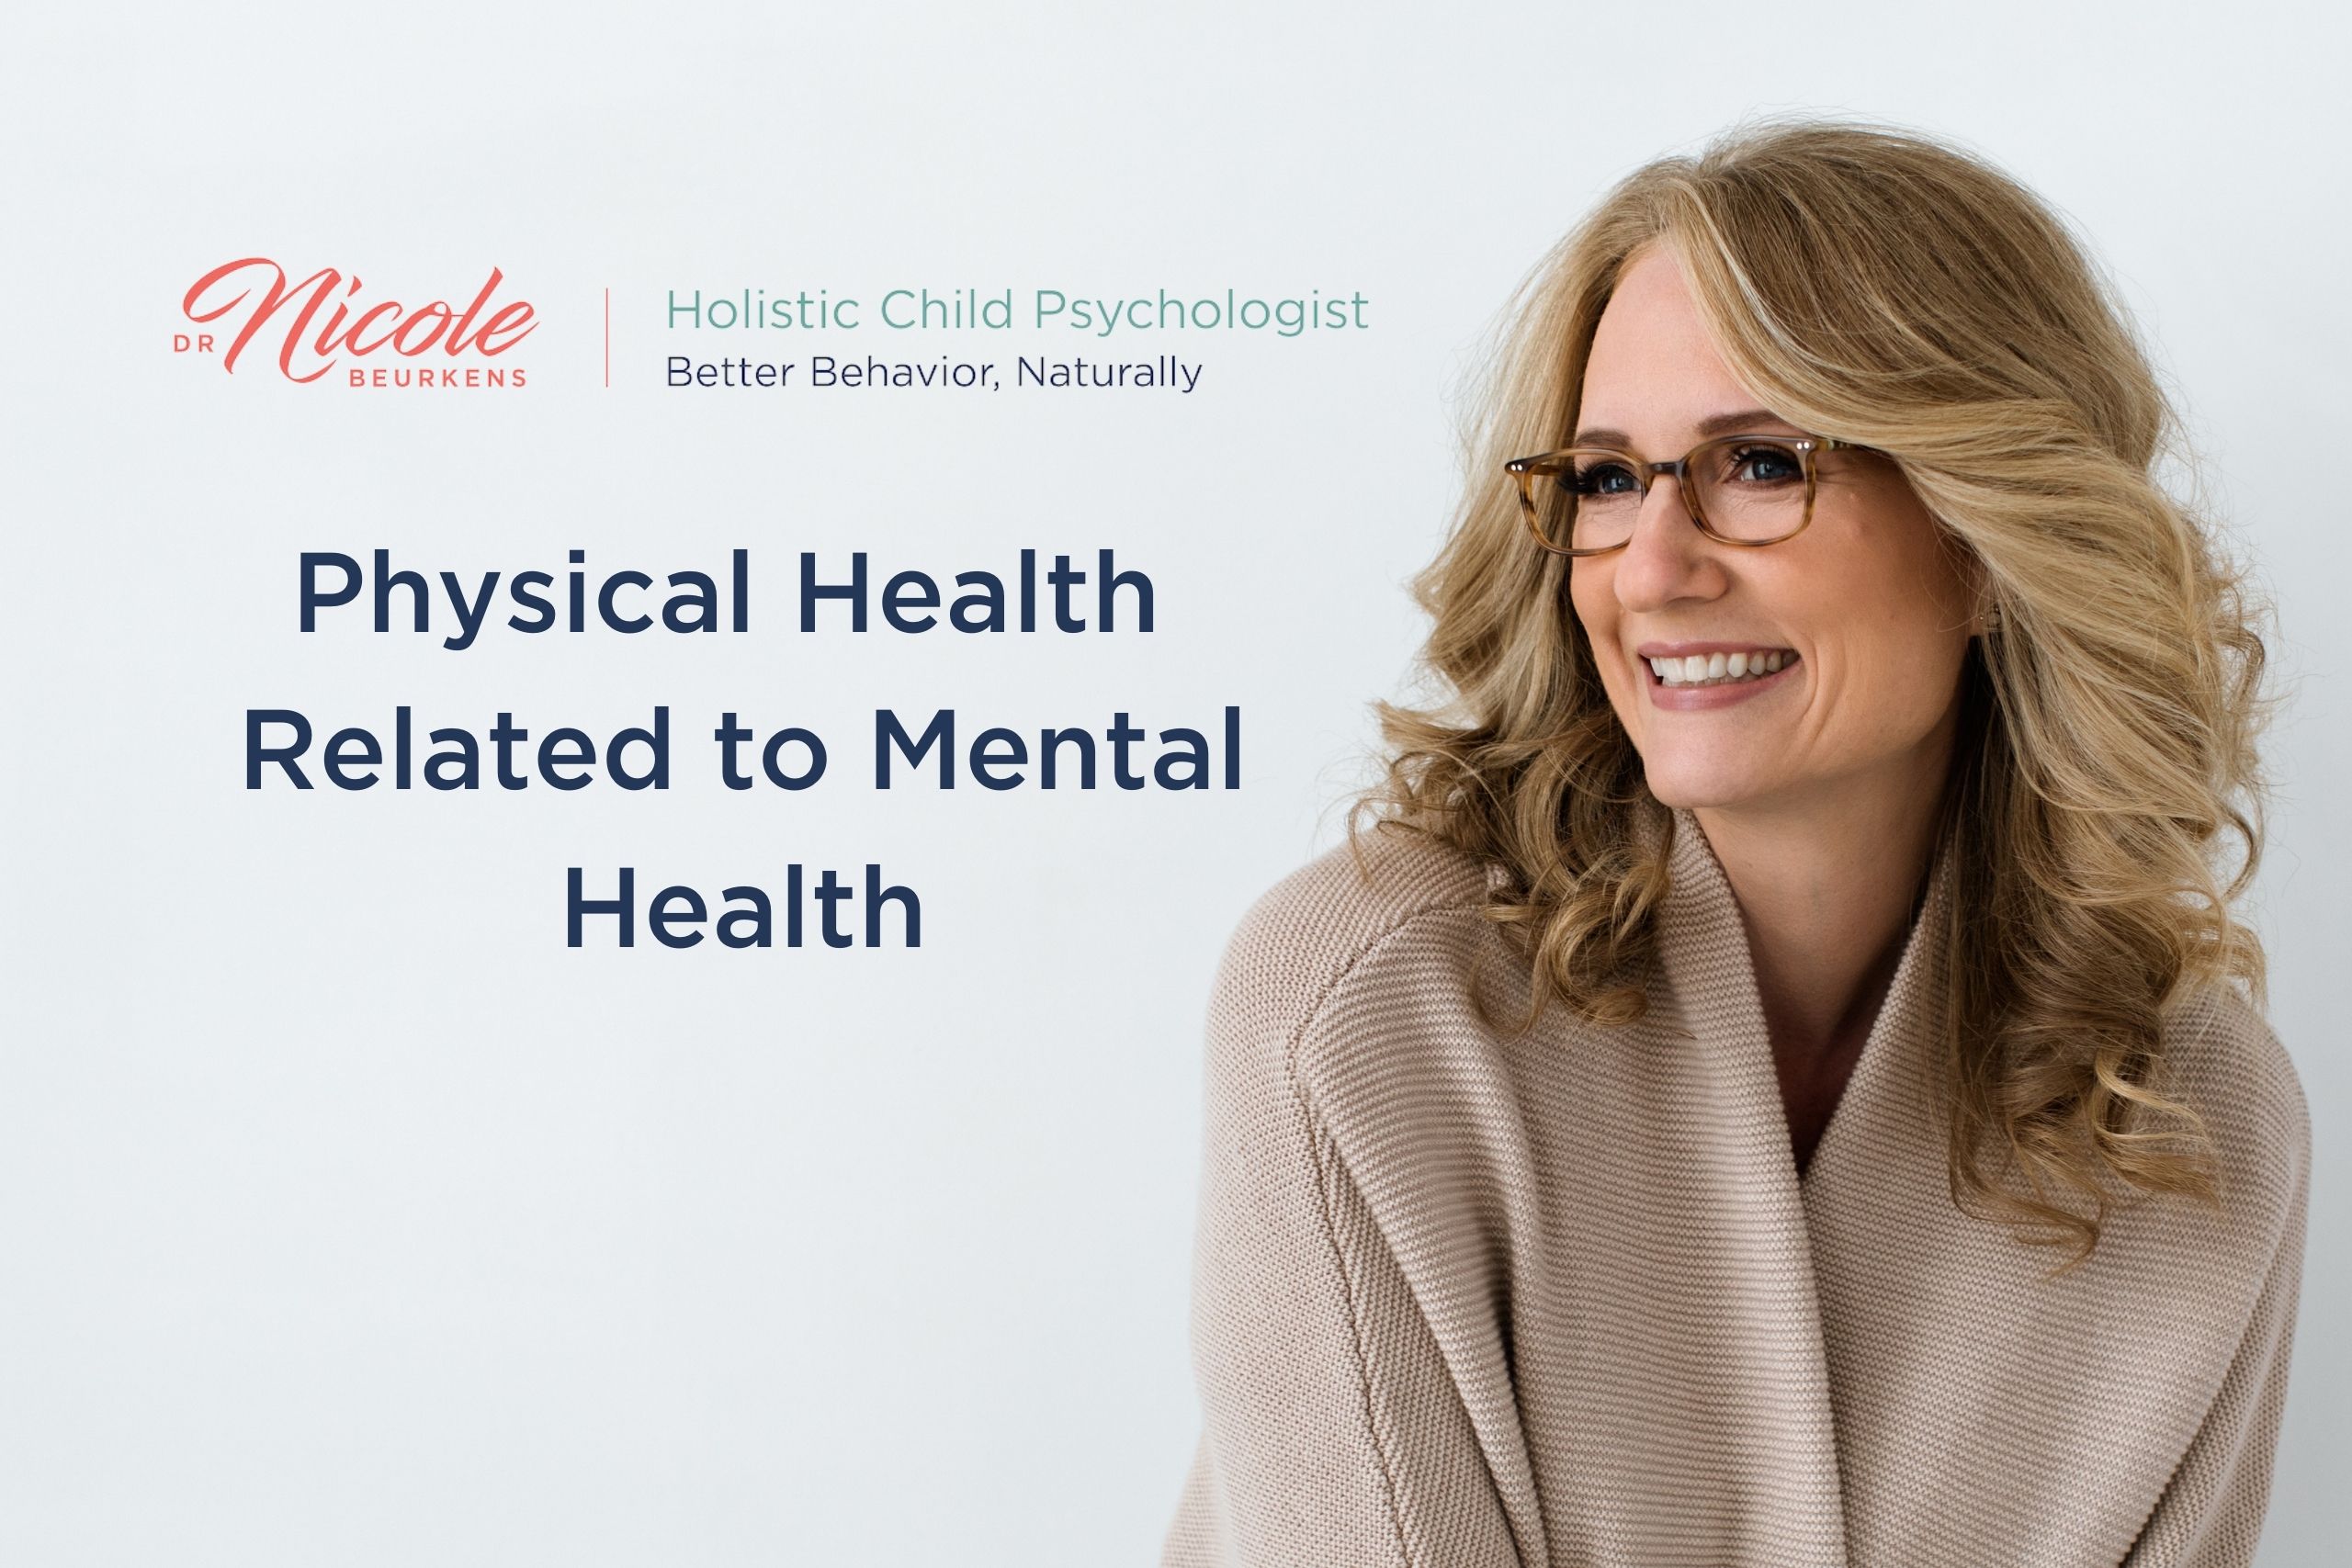 Physical health and mental health are connected